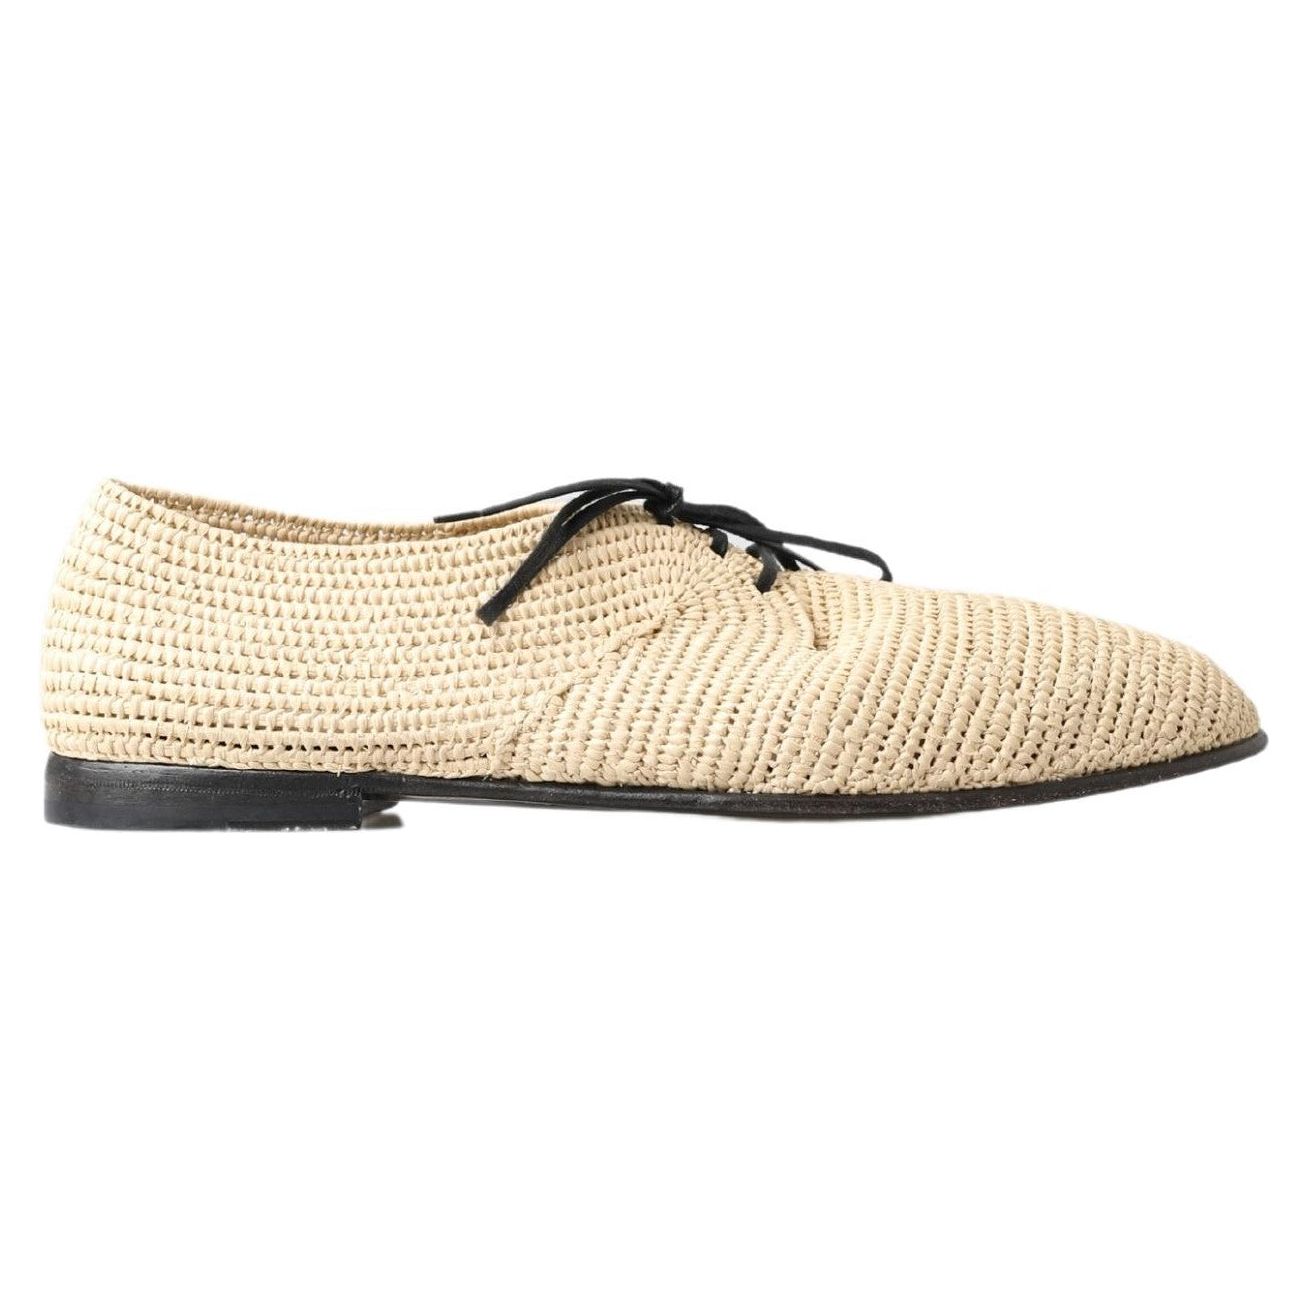 Dolce & Gabbana Chic Beige Derby Lace-Up Casual Men's Shoes beige-woven-lace-up-casual-derby-shoes